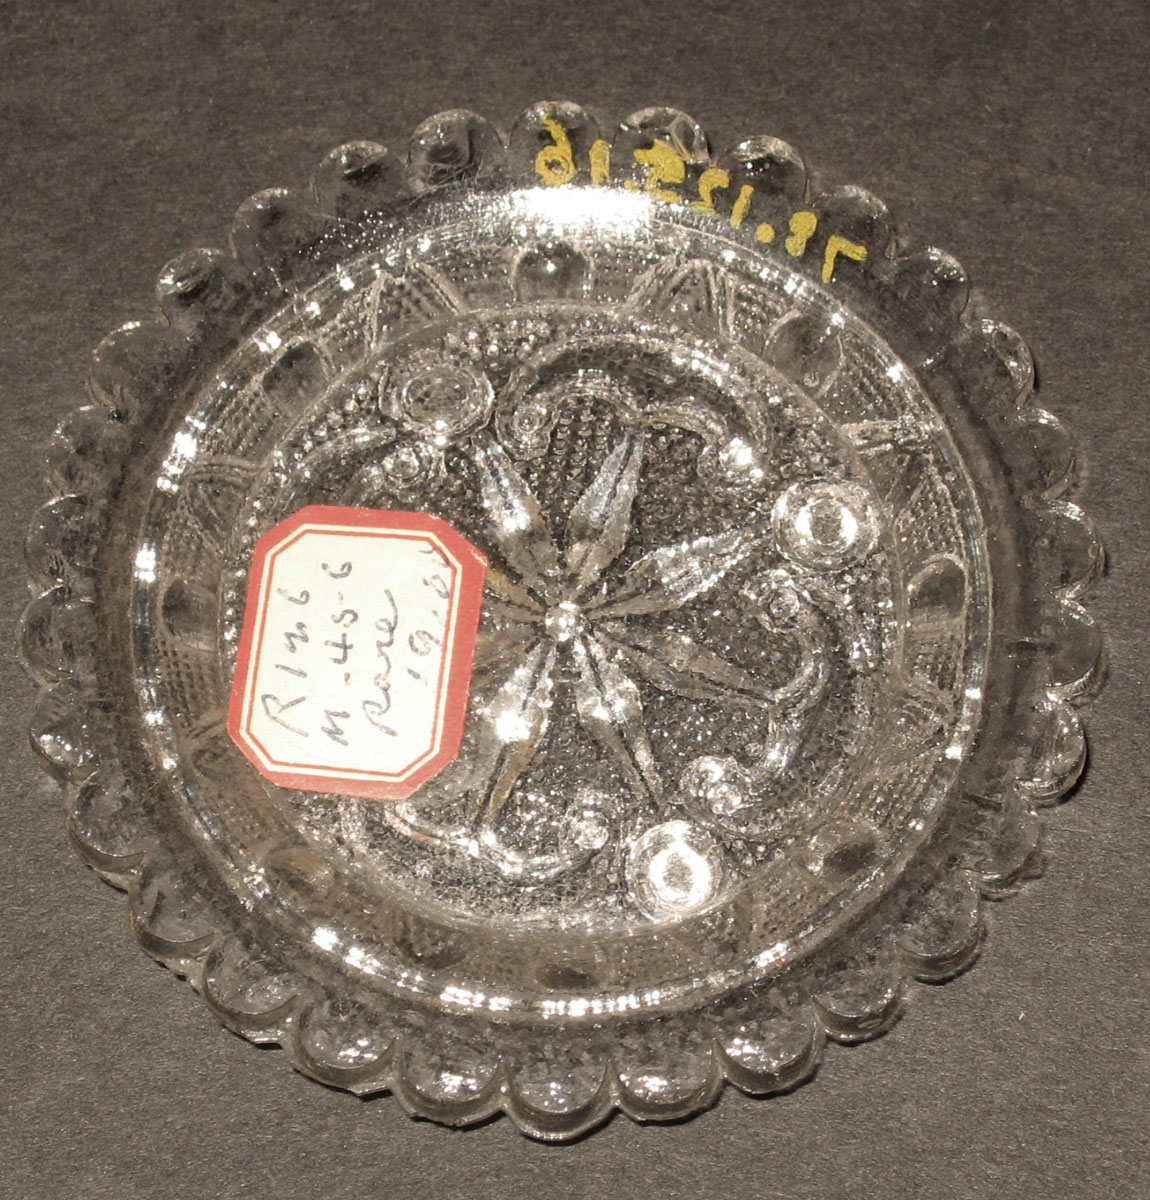 1978.0125.016 Glass cup plate